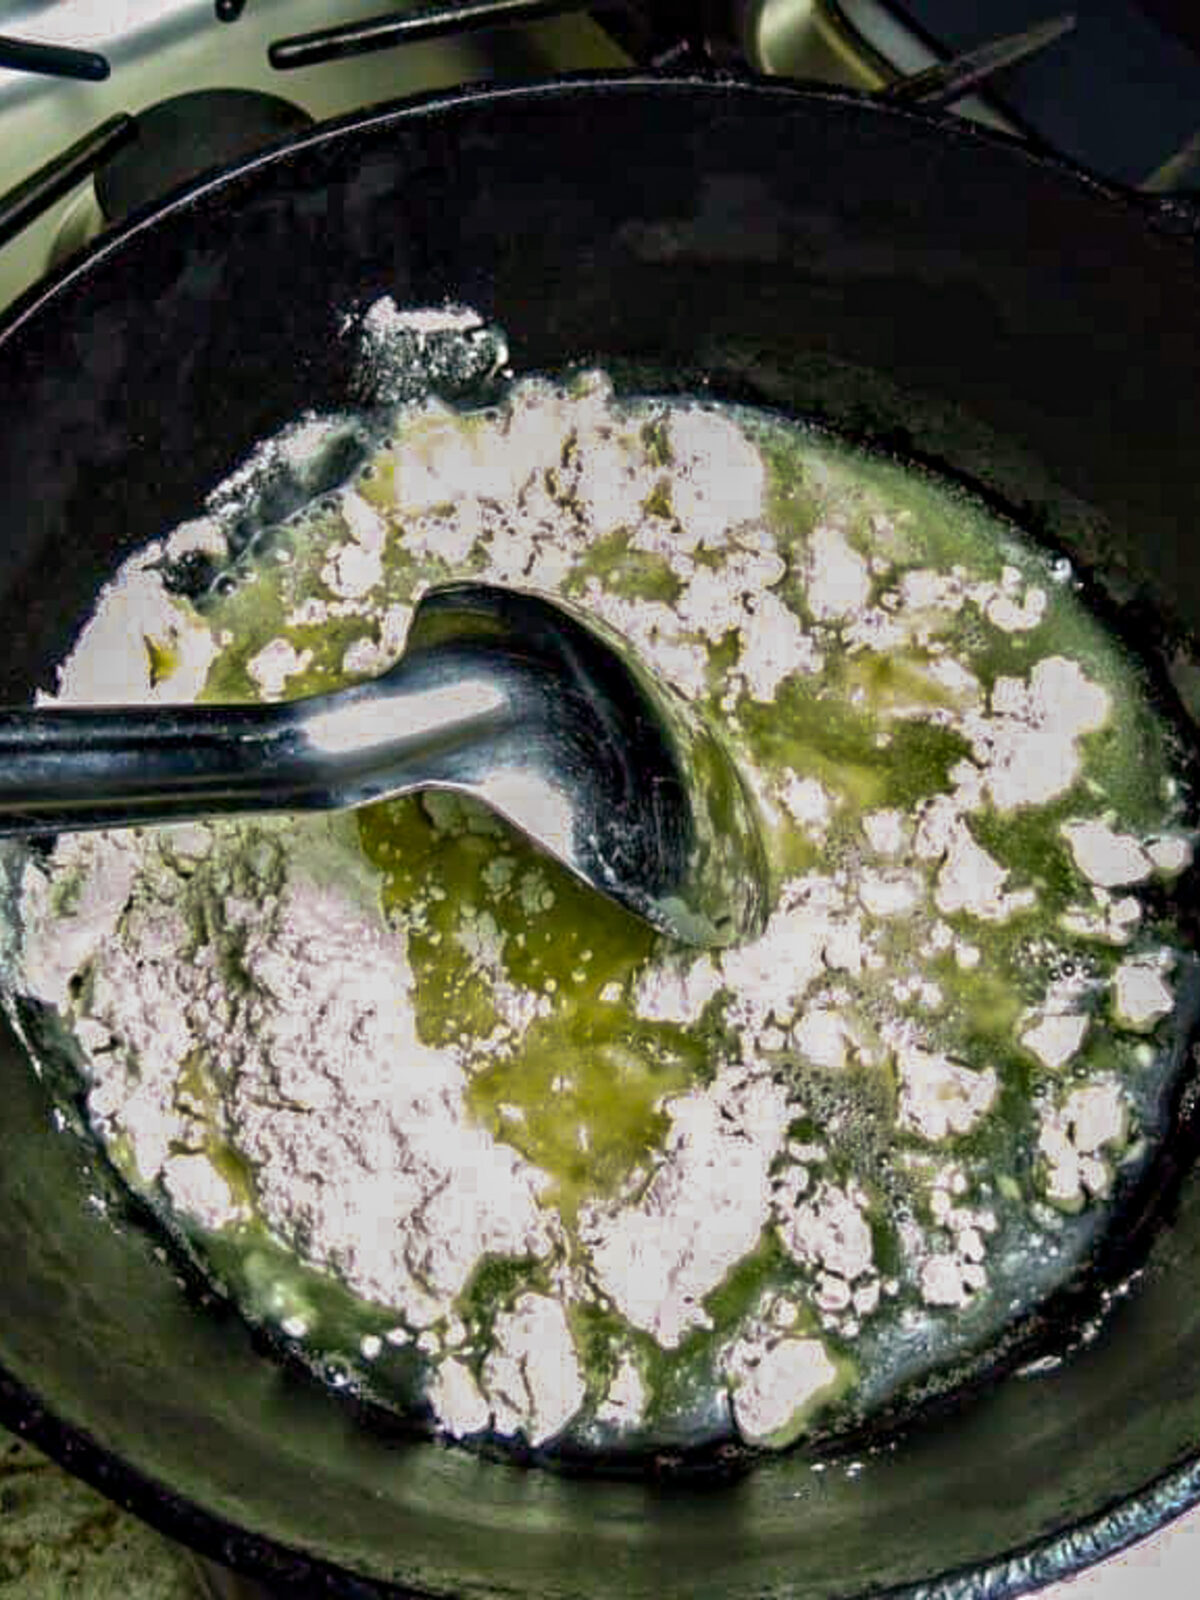 Flour and oil stiired in a black pot by a silver spoon for a roux.